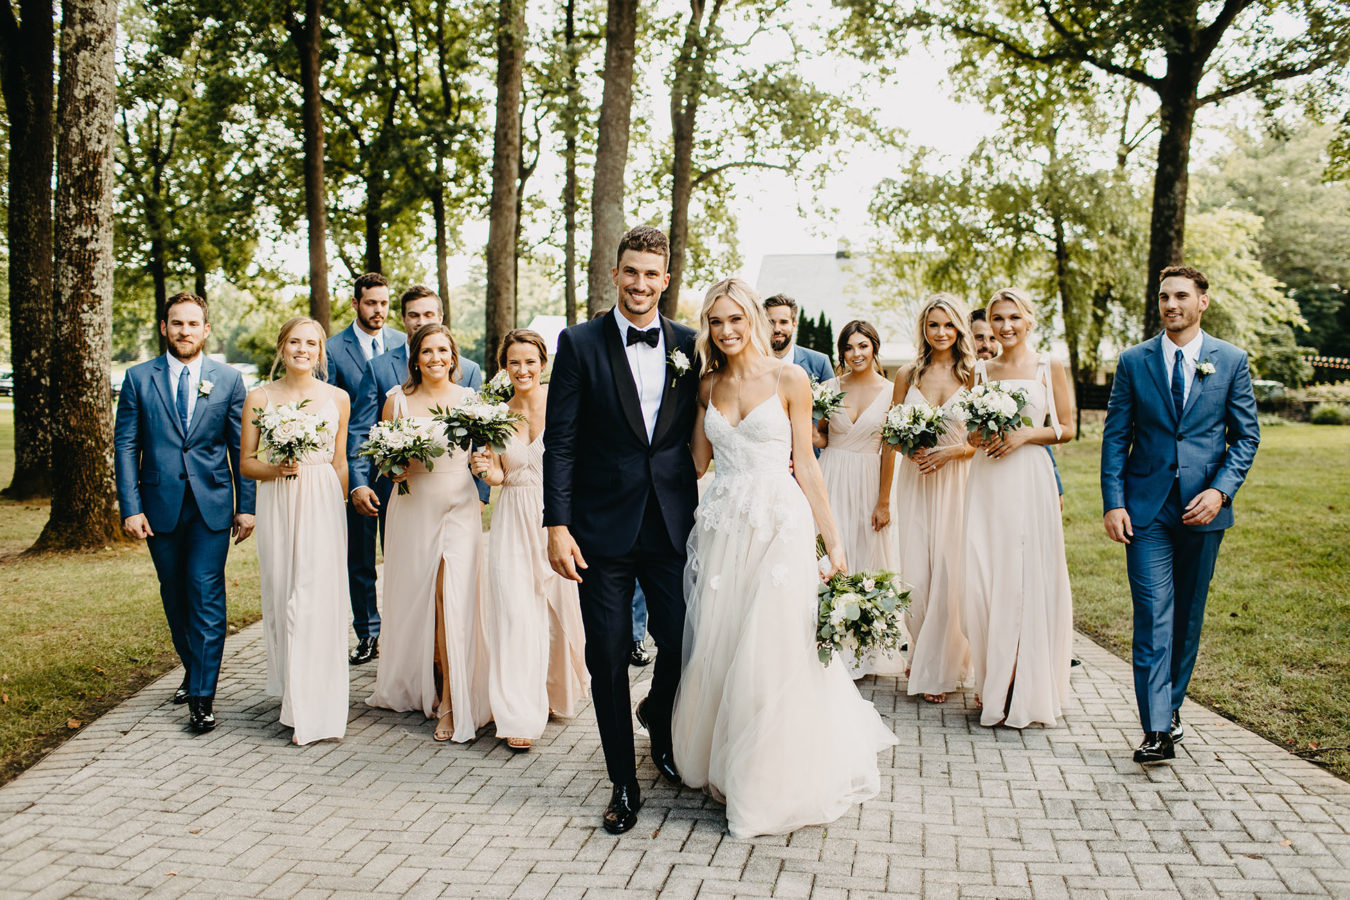 Roman Josi + Ellie Ottaway's Wedding Day Prep and Ceremony  Roman Josi +  Ellie Ottaway's Wedding Day prep-You will LOVE this! Just the sweetest  catpure of their ceremony prep and the